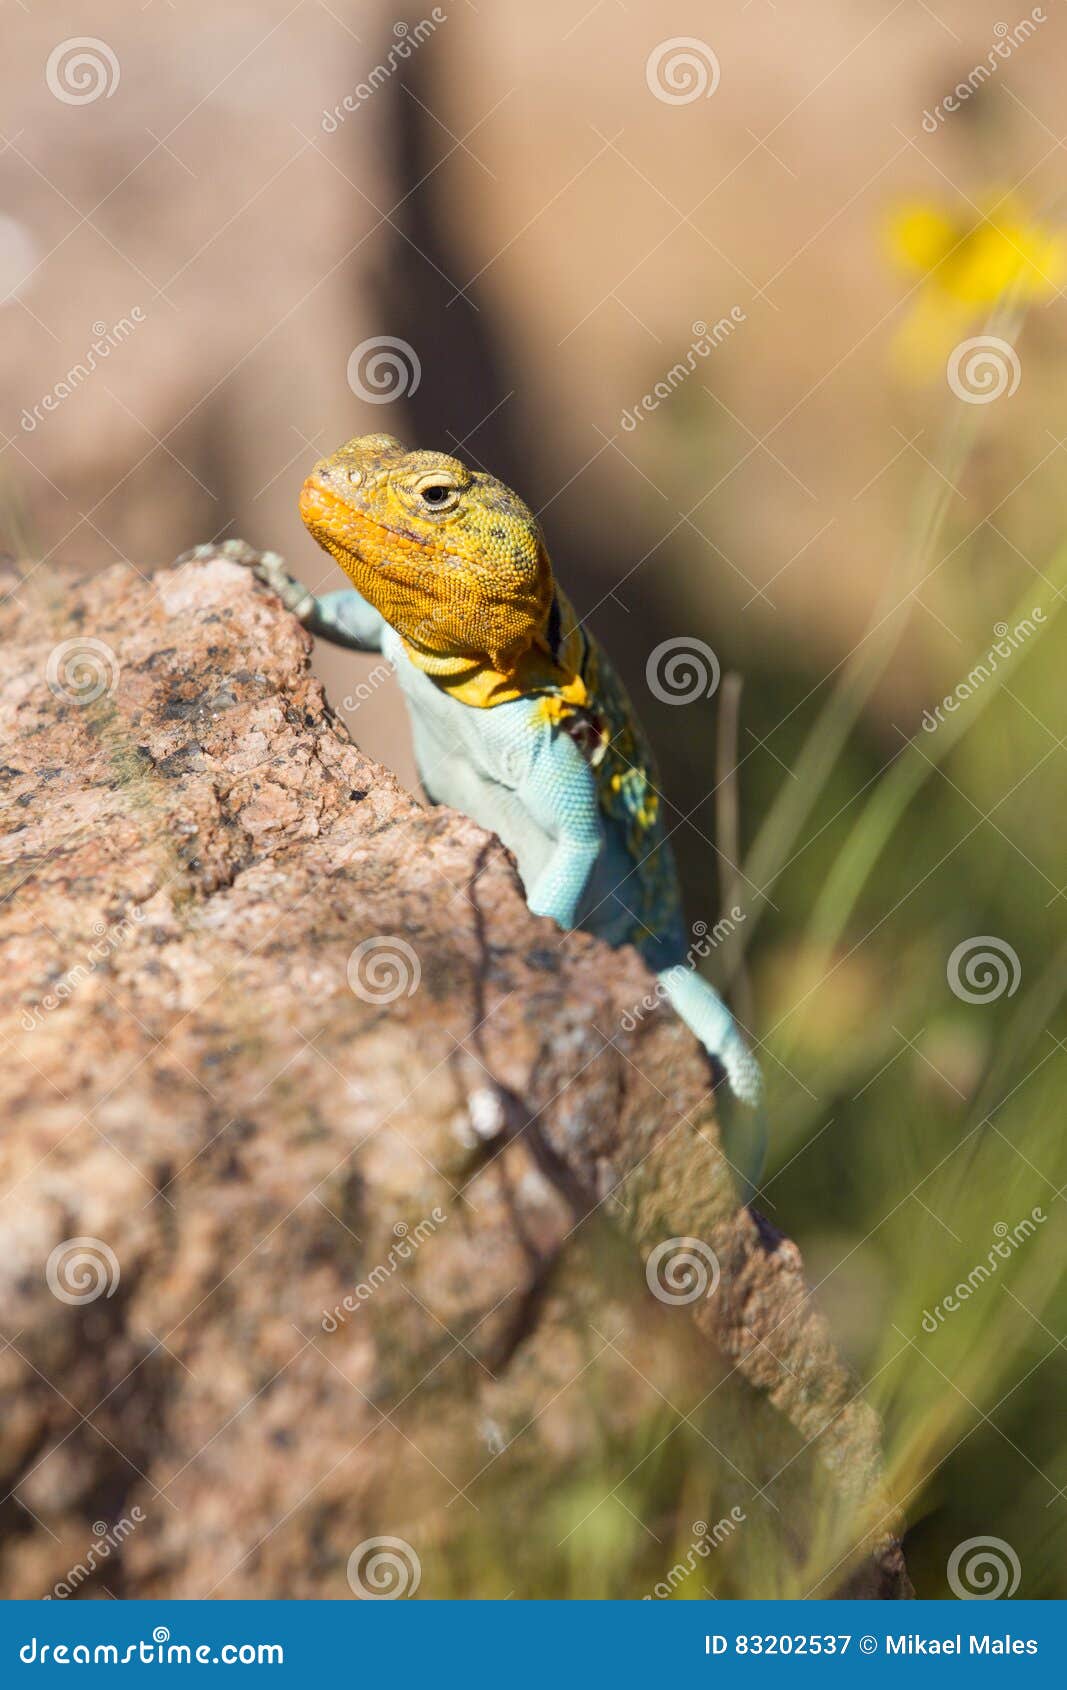 beautiful coloration of collared lizard